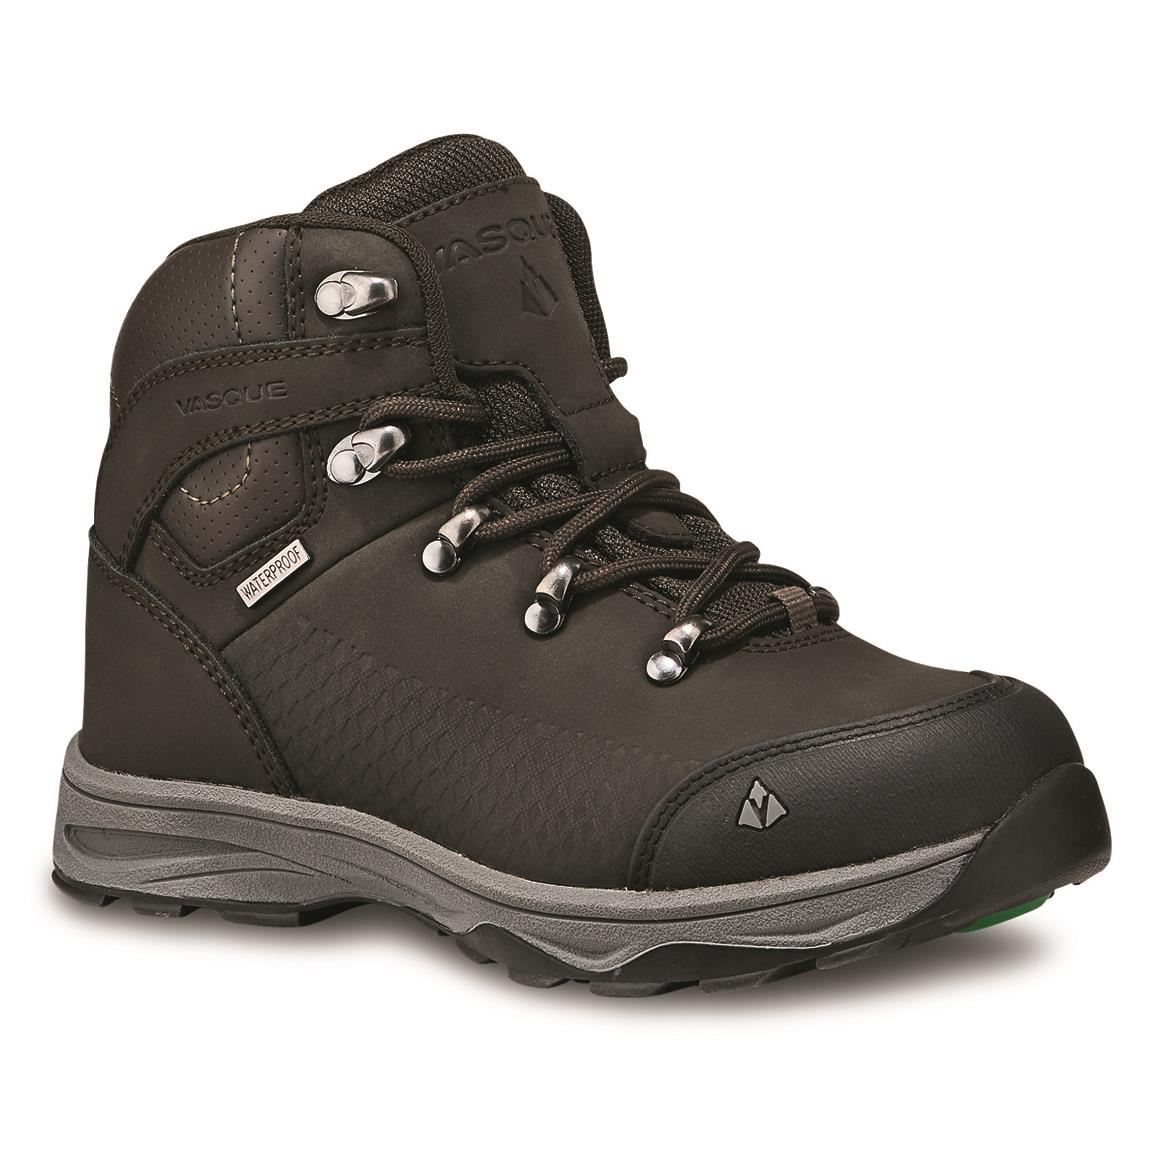 Vasque Kids' St. Elias Mid UltraDry Hiking Boots, Bungee Cord